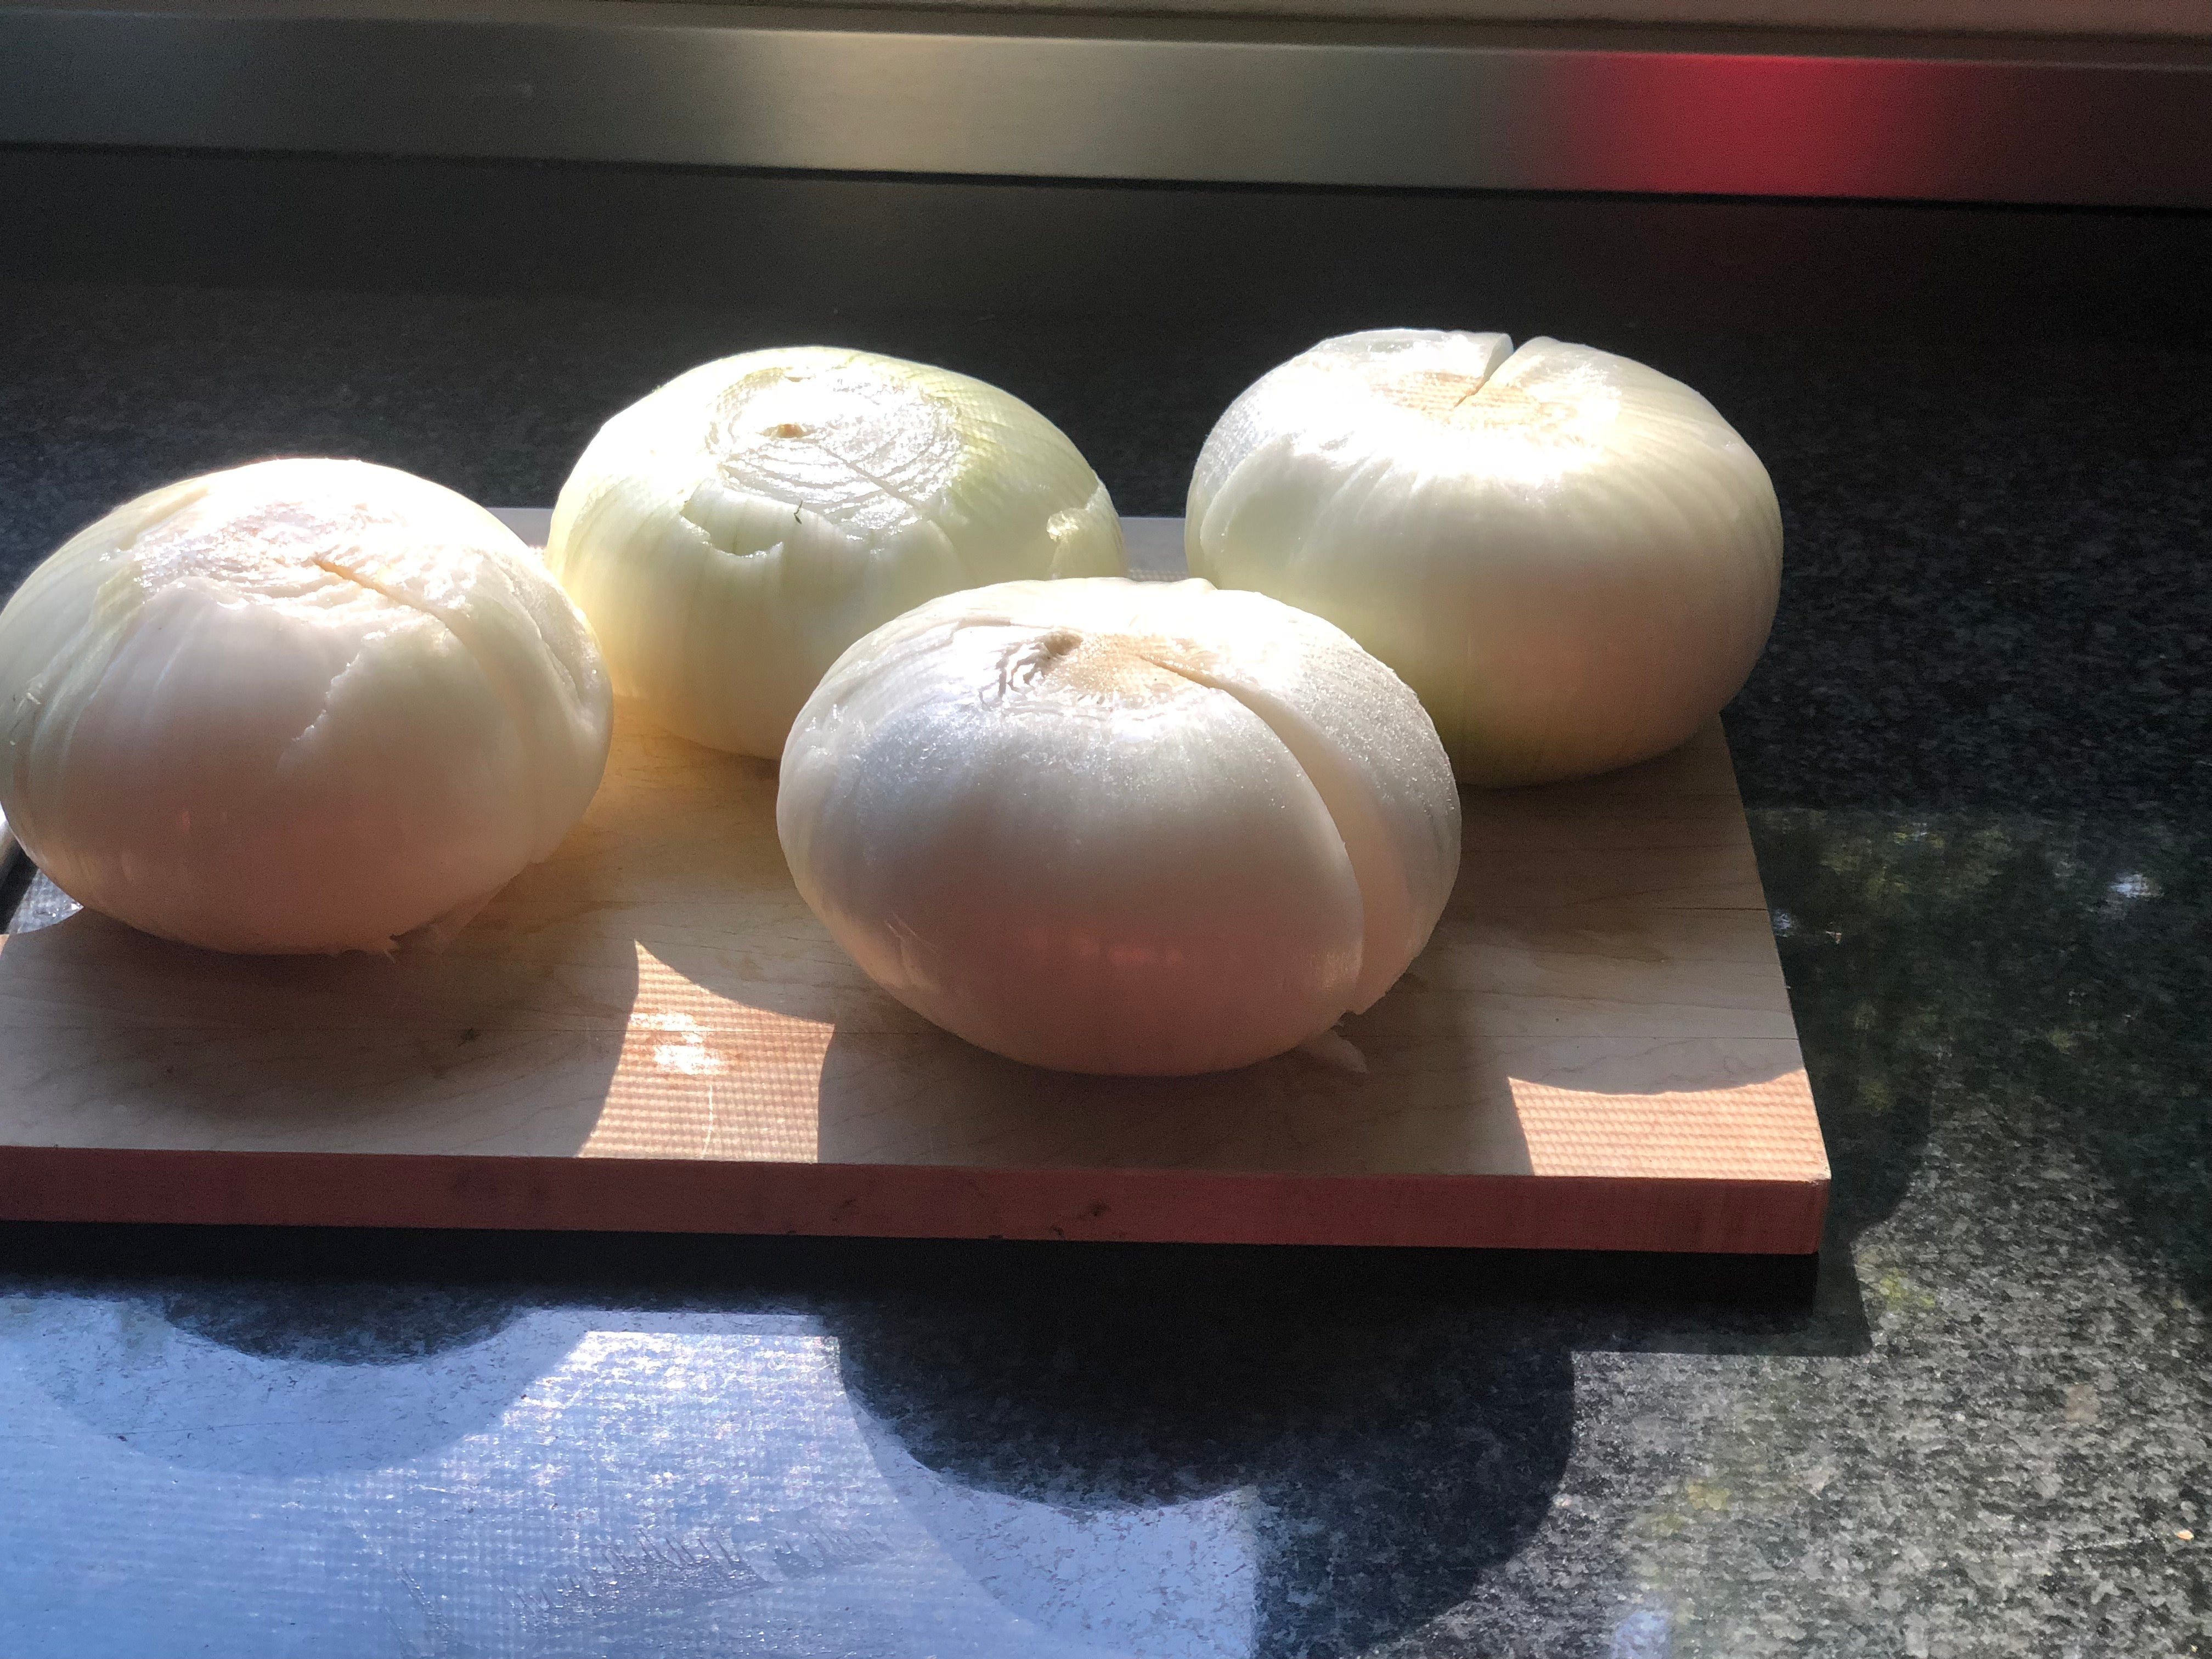 How to cut onion for stuffed onions